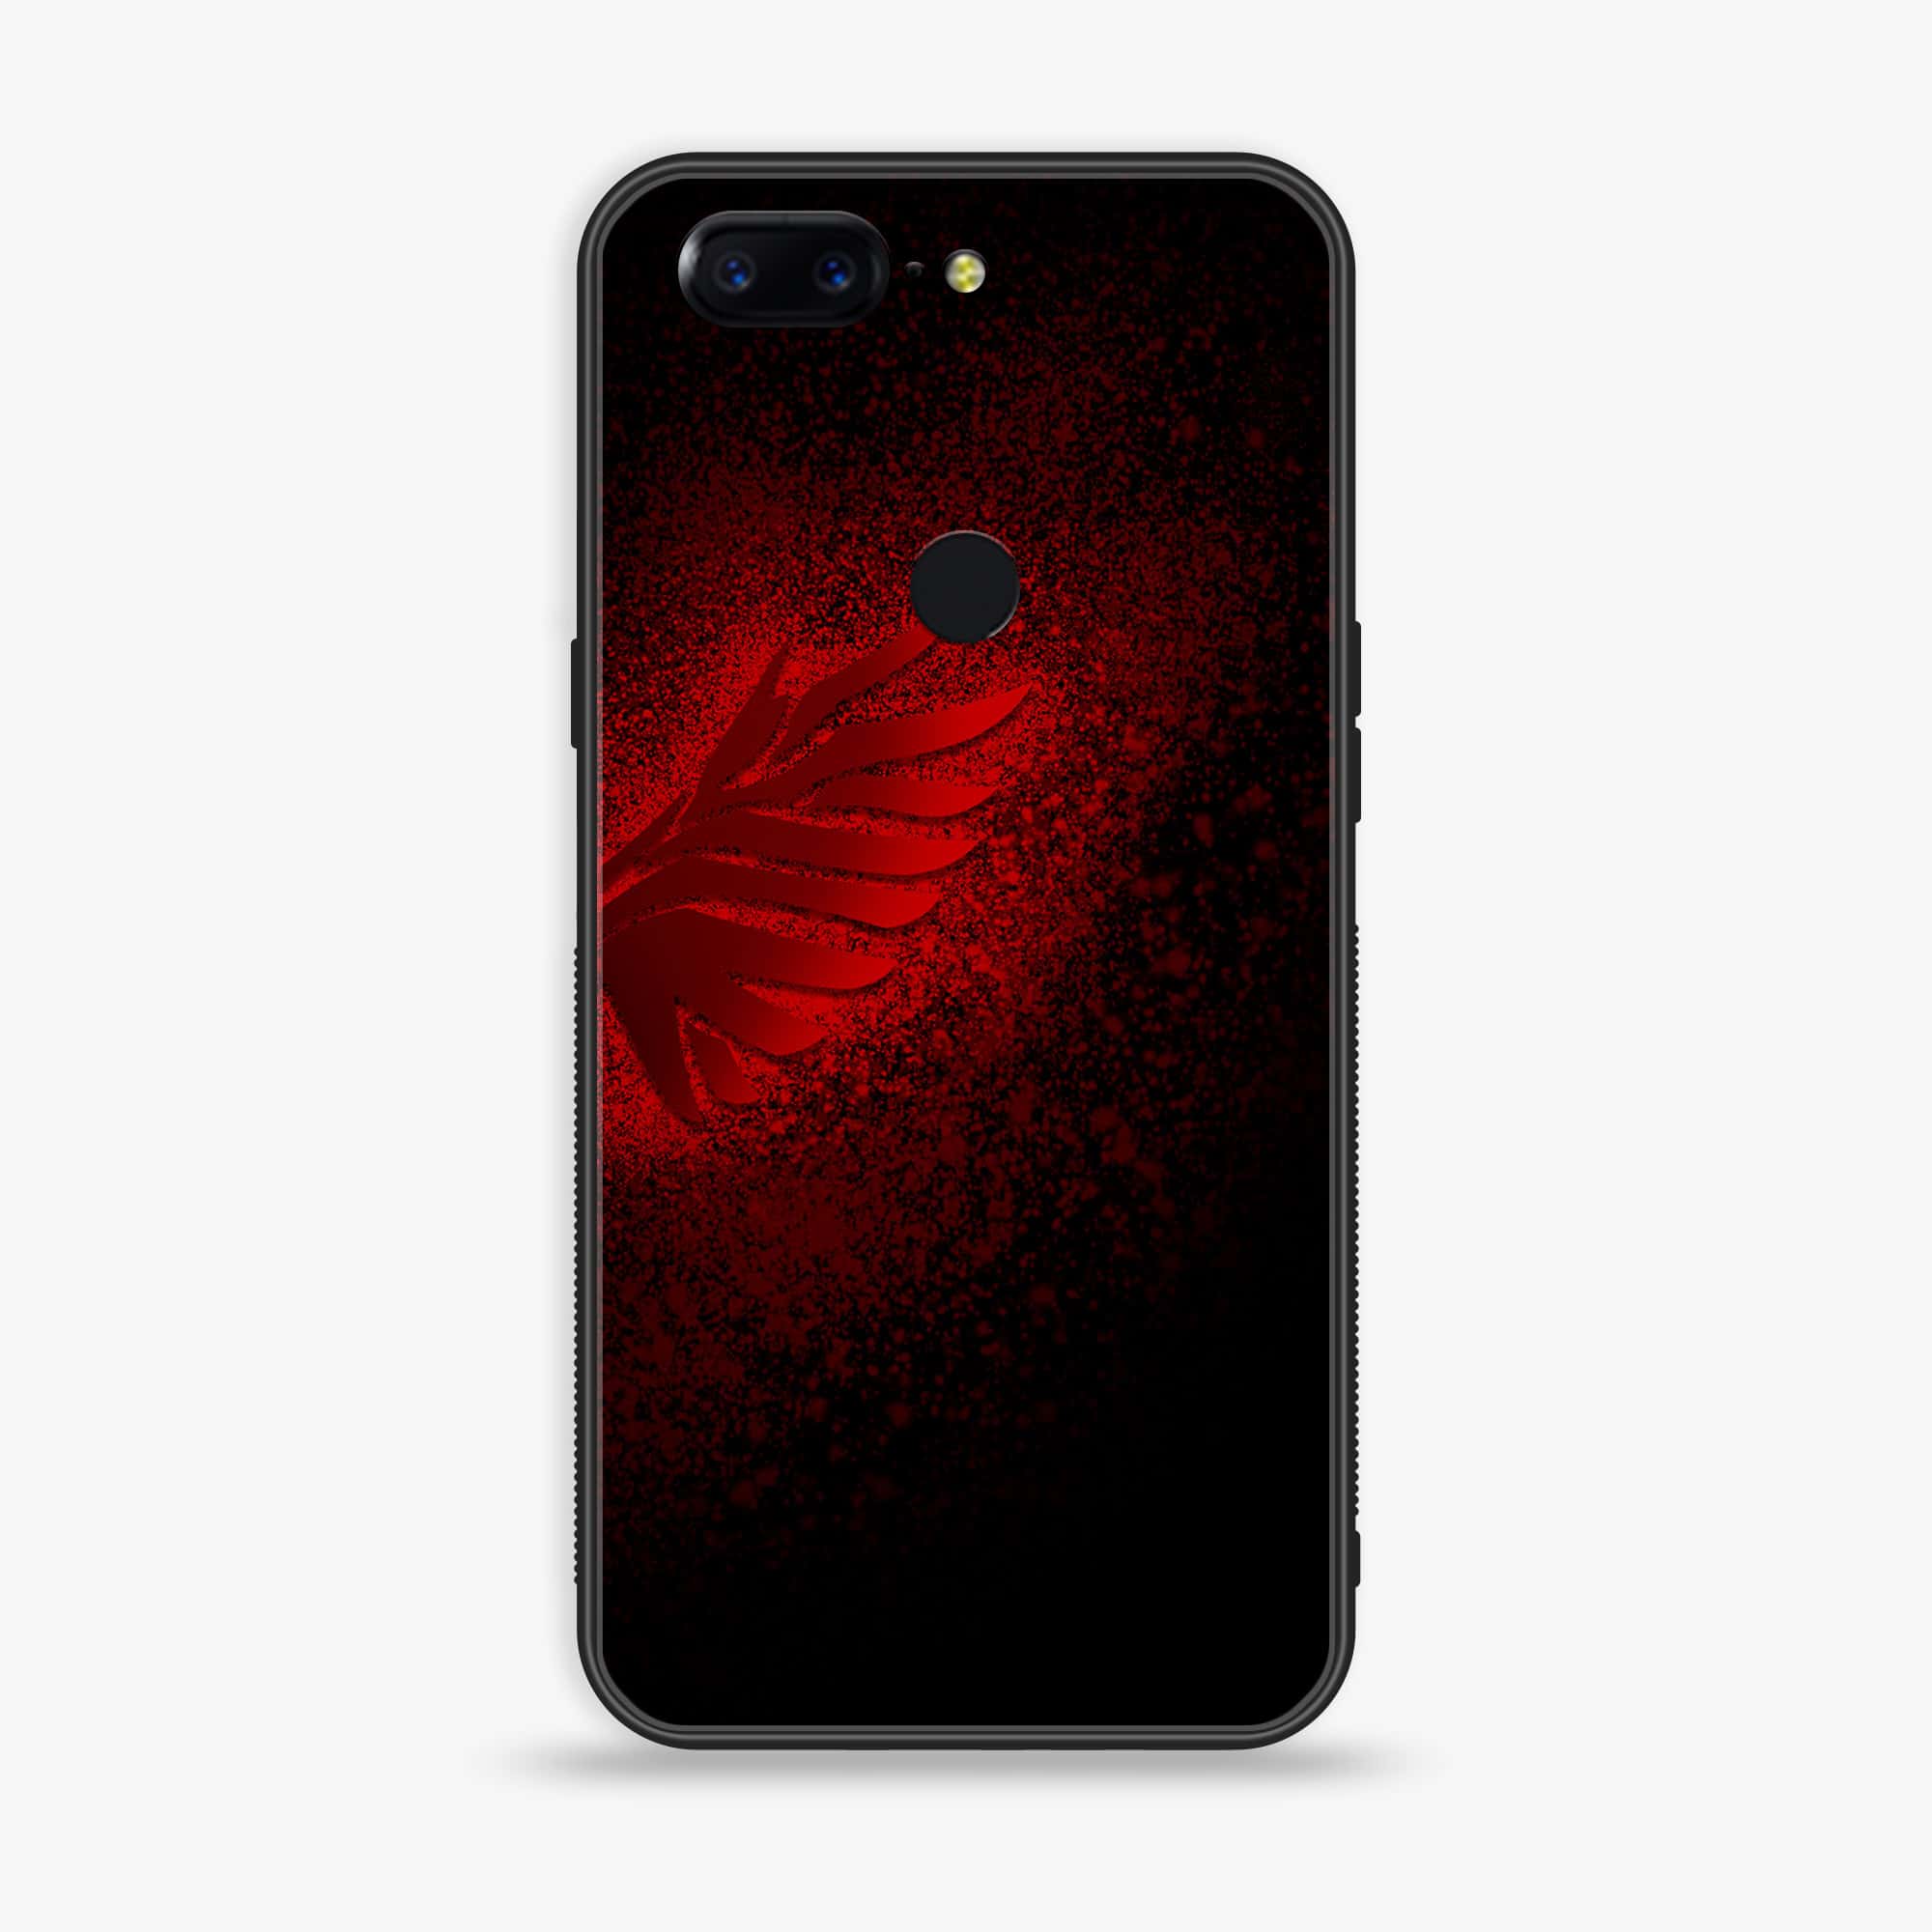 OnePlus 5T - Angel Wings 2.0 Series - Premium Printed Glass soft Bumper shock Proof Case